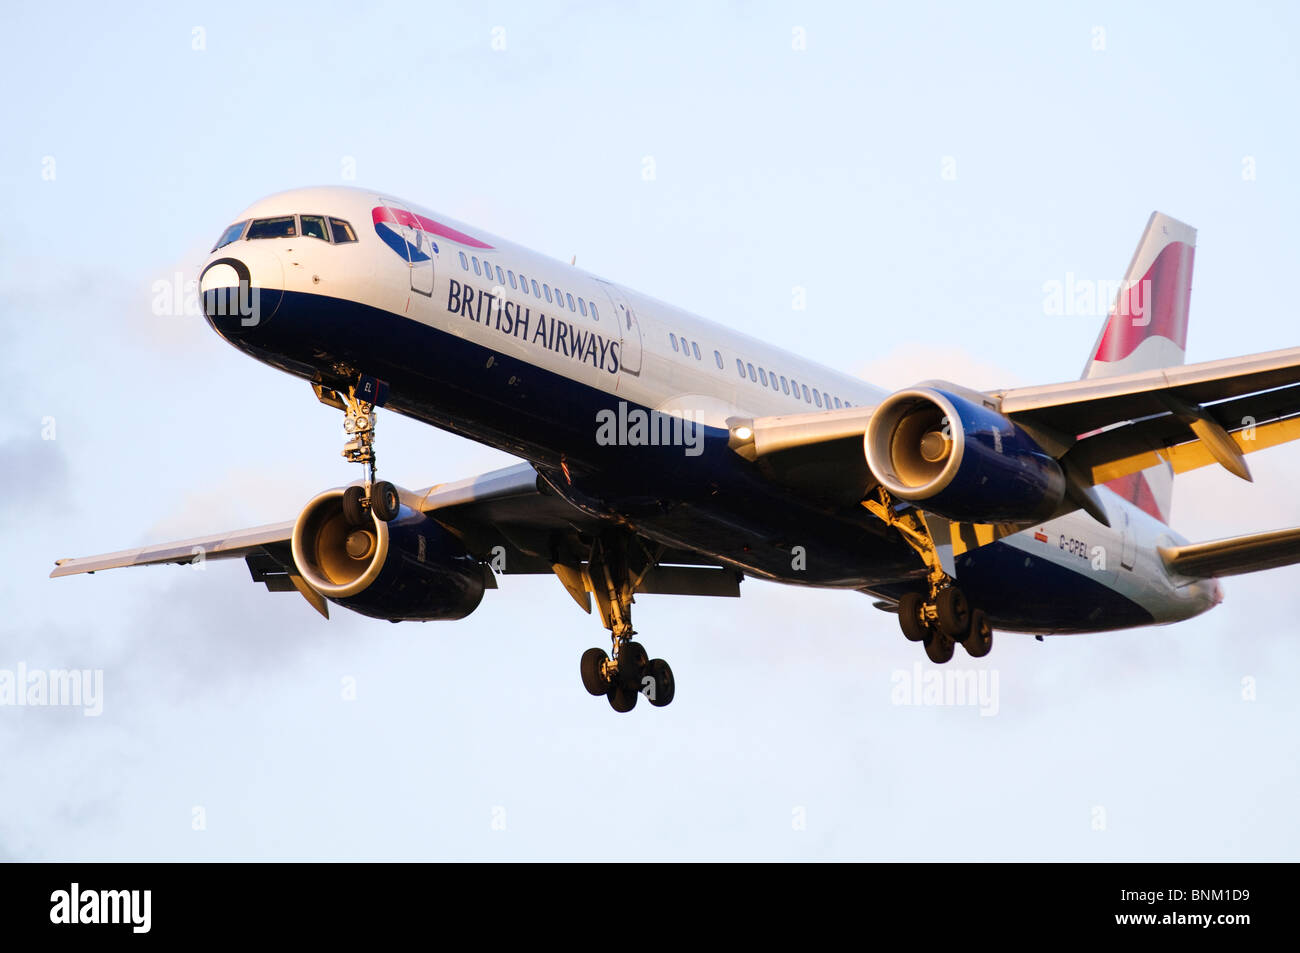 Boeing 757 operated by British Airways on approach for landing at London Heathrow Airport, UK. Stock Photo